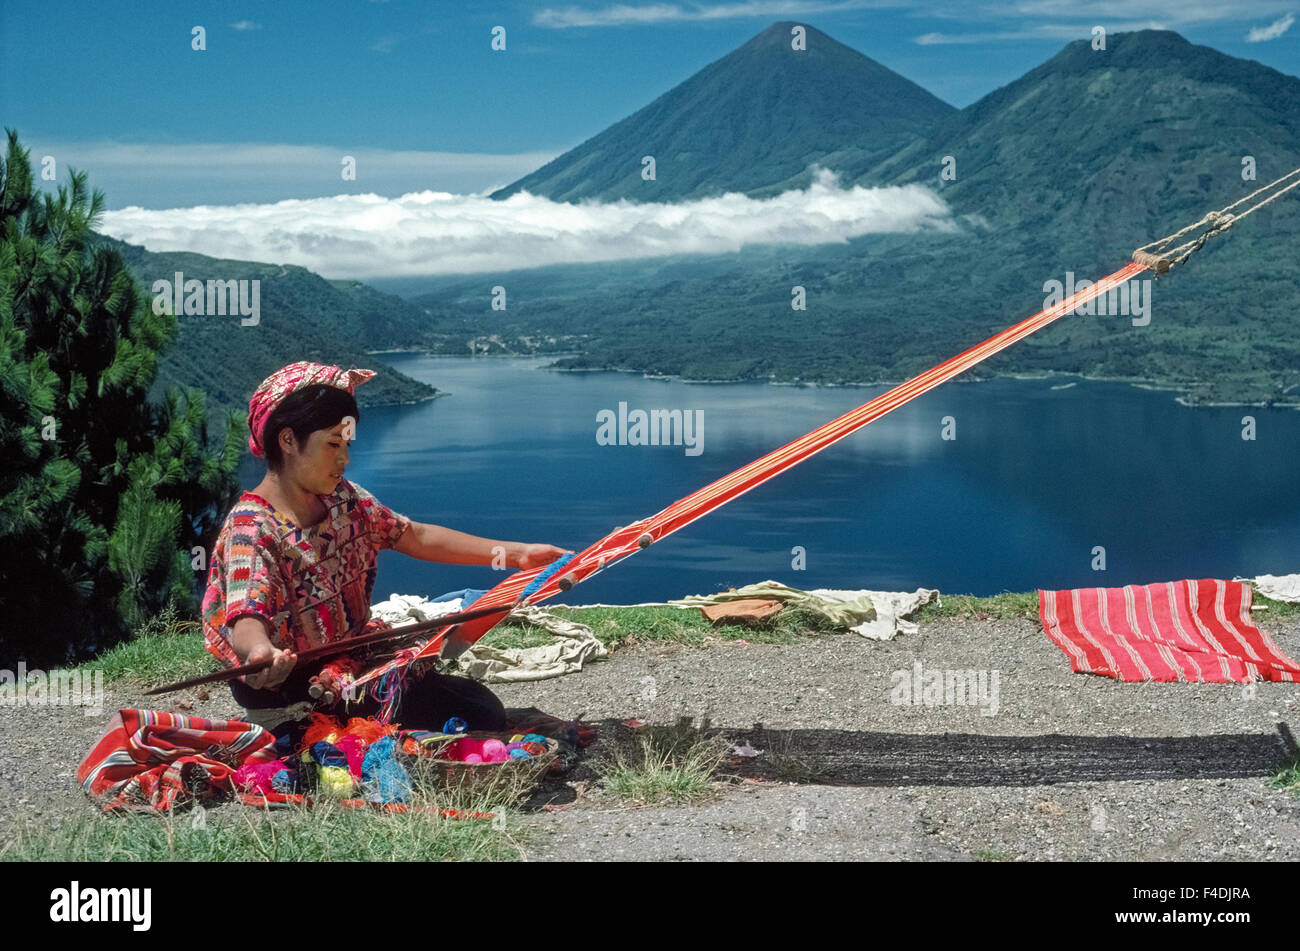 A Mayan girl in native dress weaves at her backstrap loom while overlooking Lake Atitlan in Guatemala. Flanked by volcanoes, Lake Atitlan is the deepest body of water in Central America (1,120 feet/341 meters) and considered one of the most beautiful lakes in the world. Stock Photo